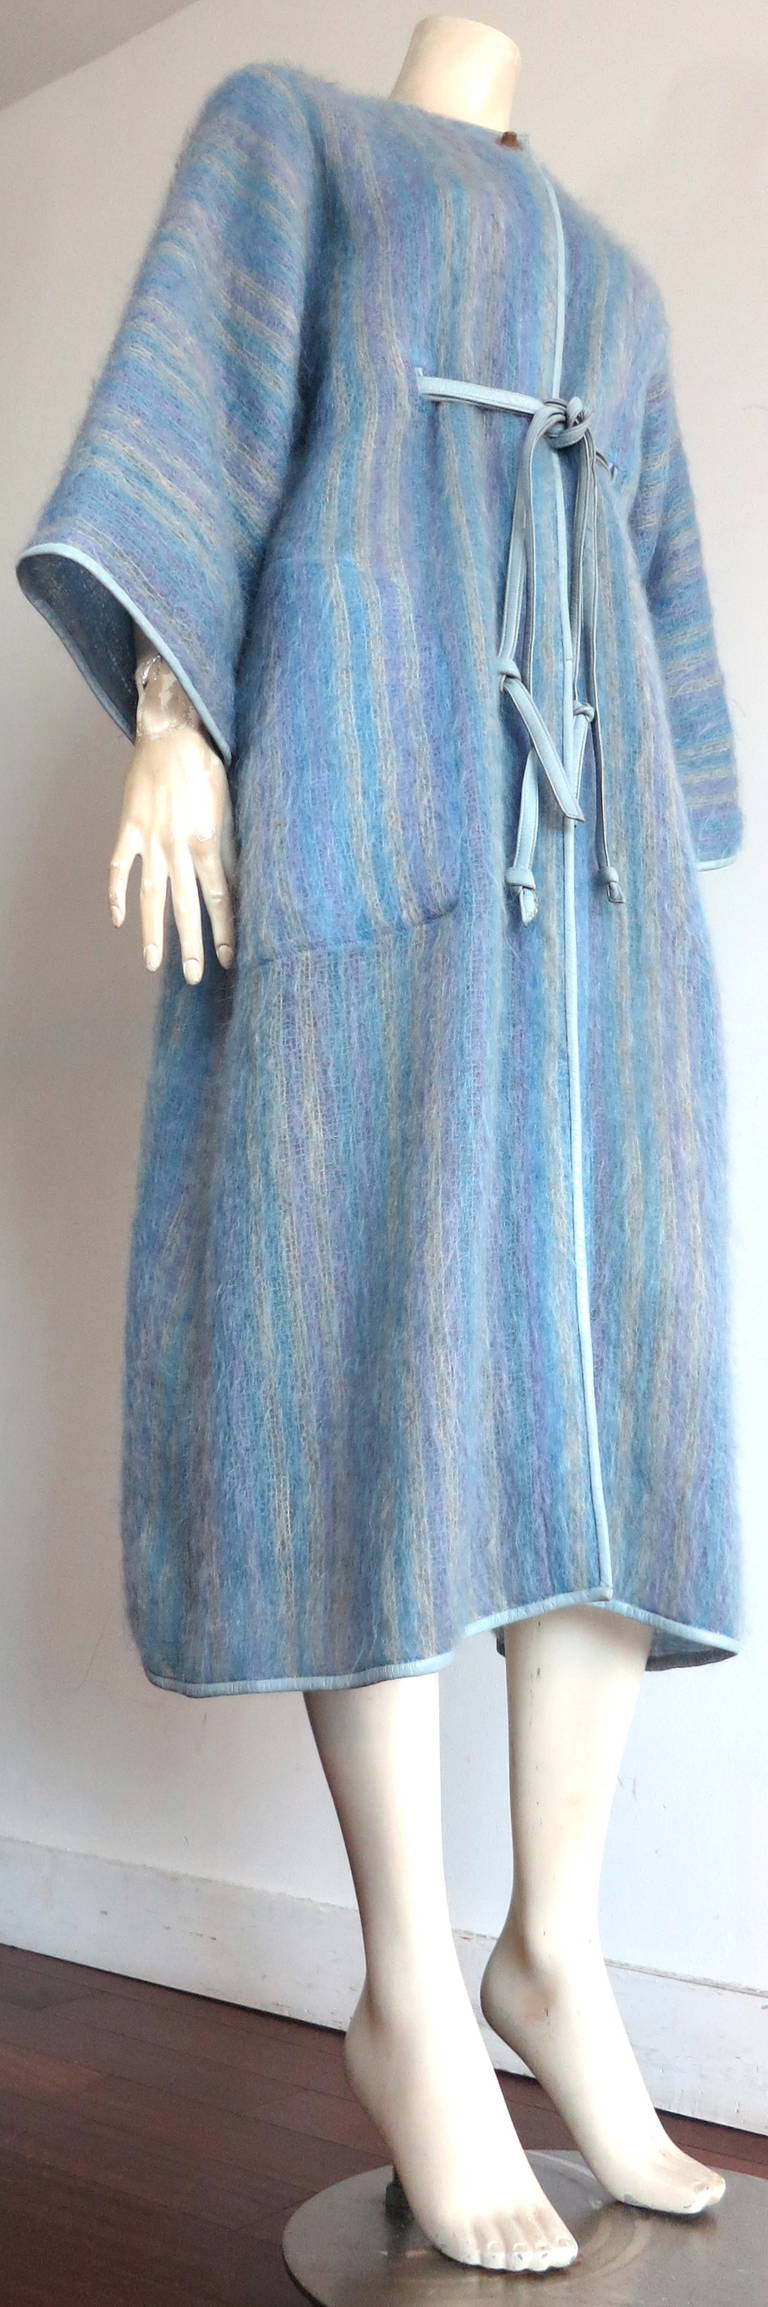 Excellent condition BONNIE CASHIN / Sills mohair & leather coat.

This wonderful coat was designed by Bonnie Cashin for Sills during the late 1960s to early 1970s in New York City.

Fluffy, blue and pale gray striped mohair fabrication with